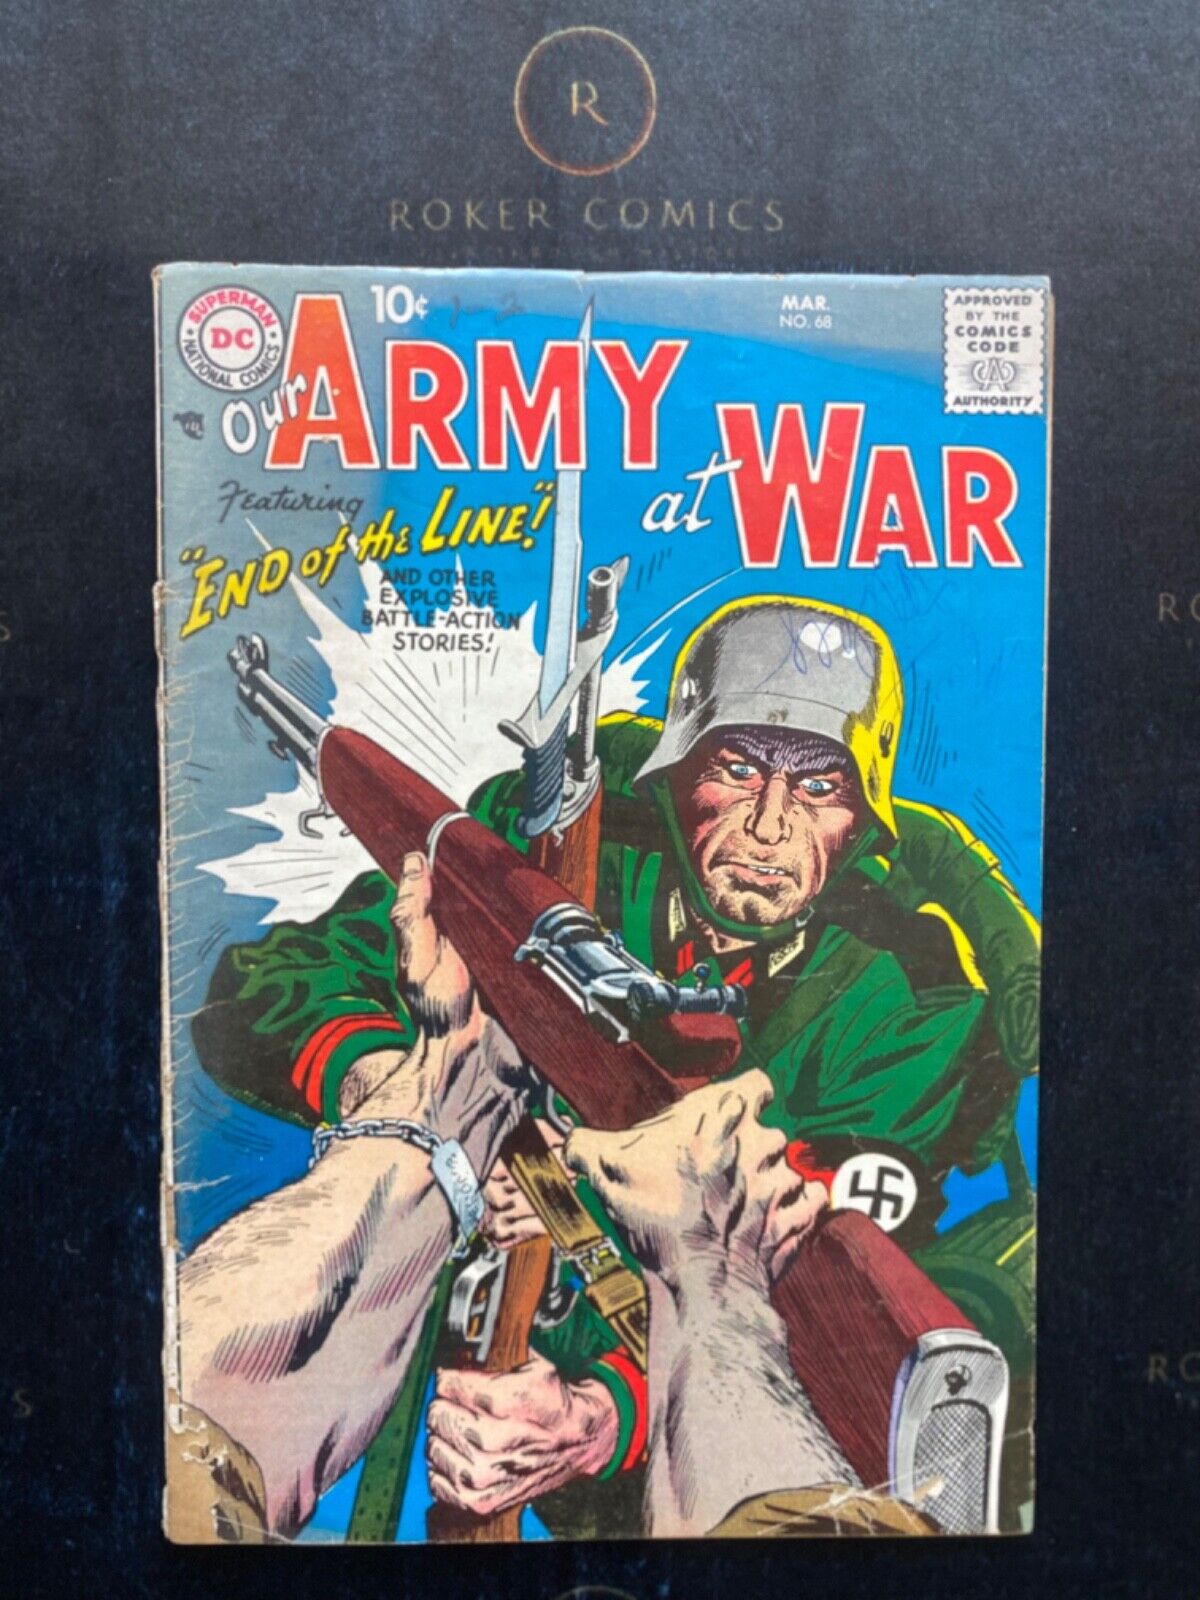 Very Rare and Cool 1958 Our Army At War #68